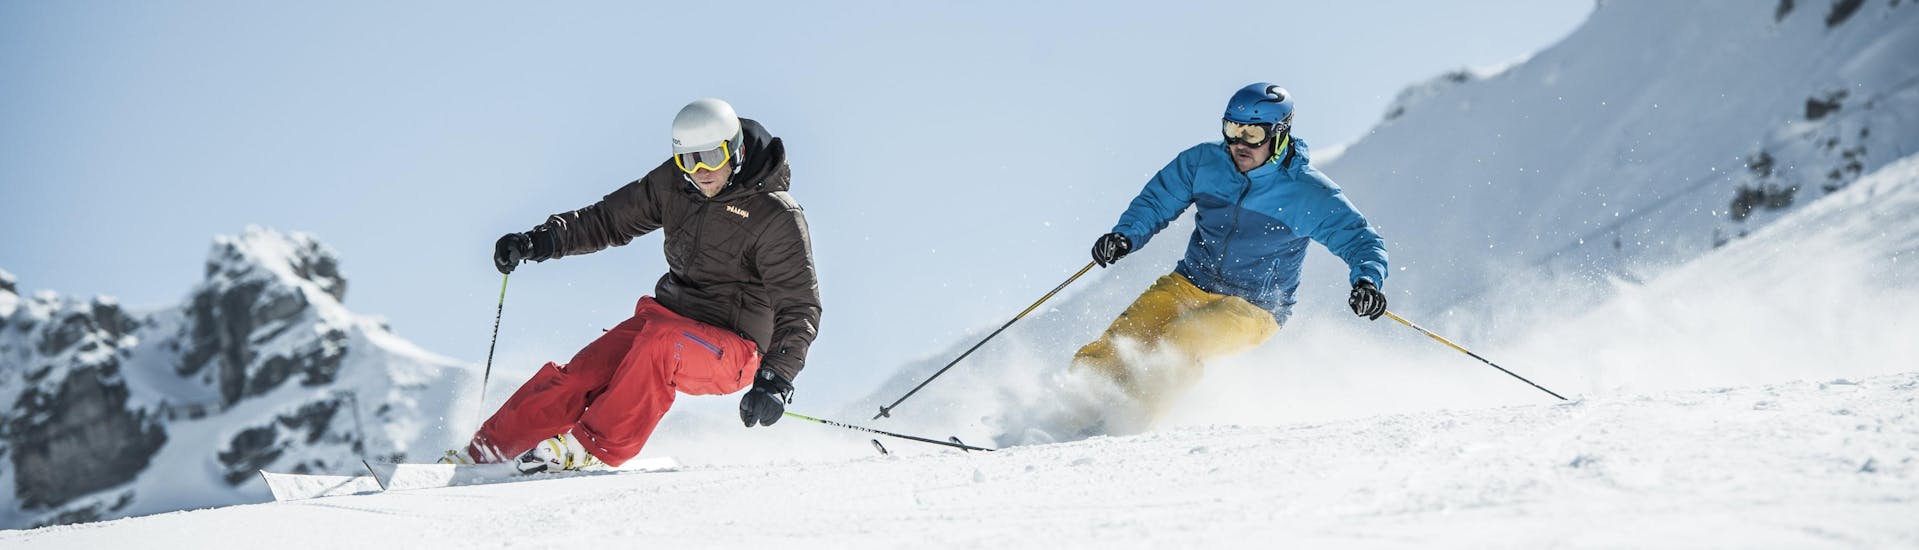 A skier practices the correct skiing technique during one of the private lessons in La Tzoumaz-Savoleyres.